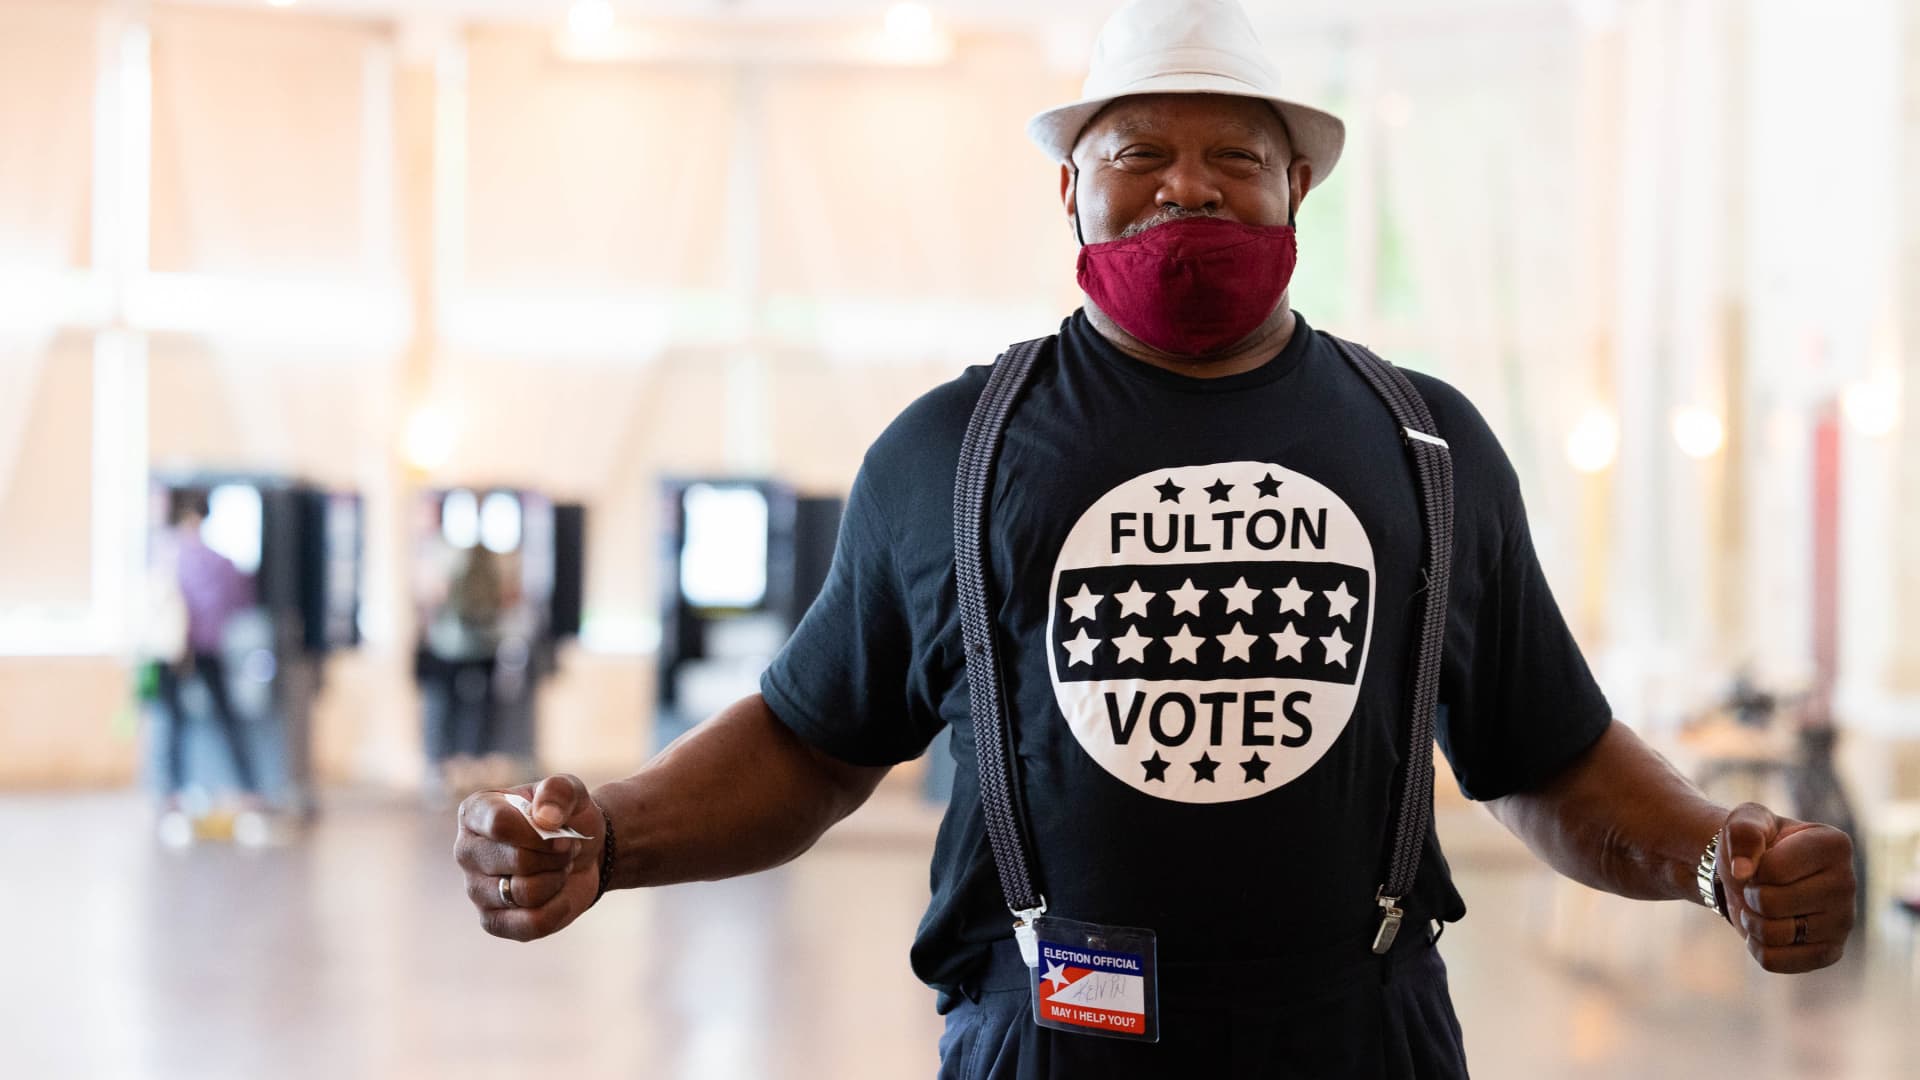 Poll worker Kelvin Ellis greets voters as they enter the Park Tavern polling location to cast their ballots in the Georgia primary election on May 24, 2022 in Atlanta, Georgia.